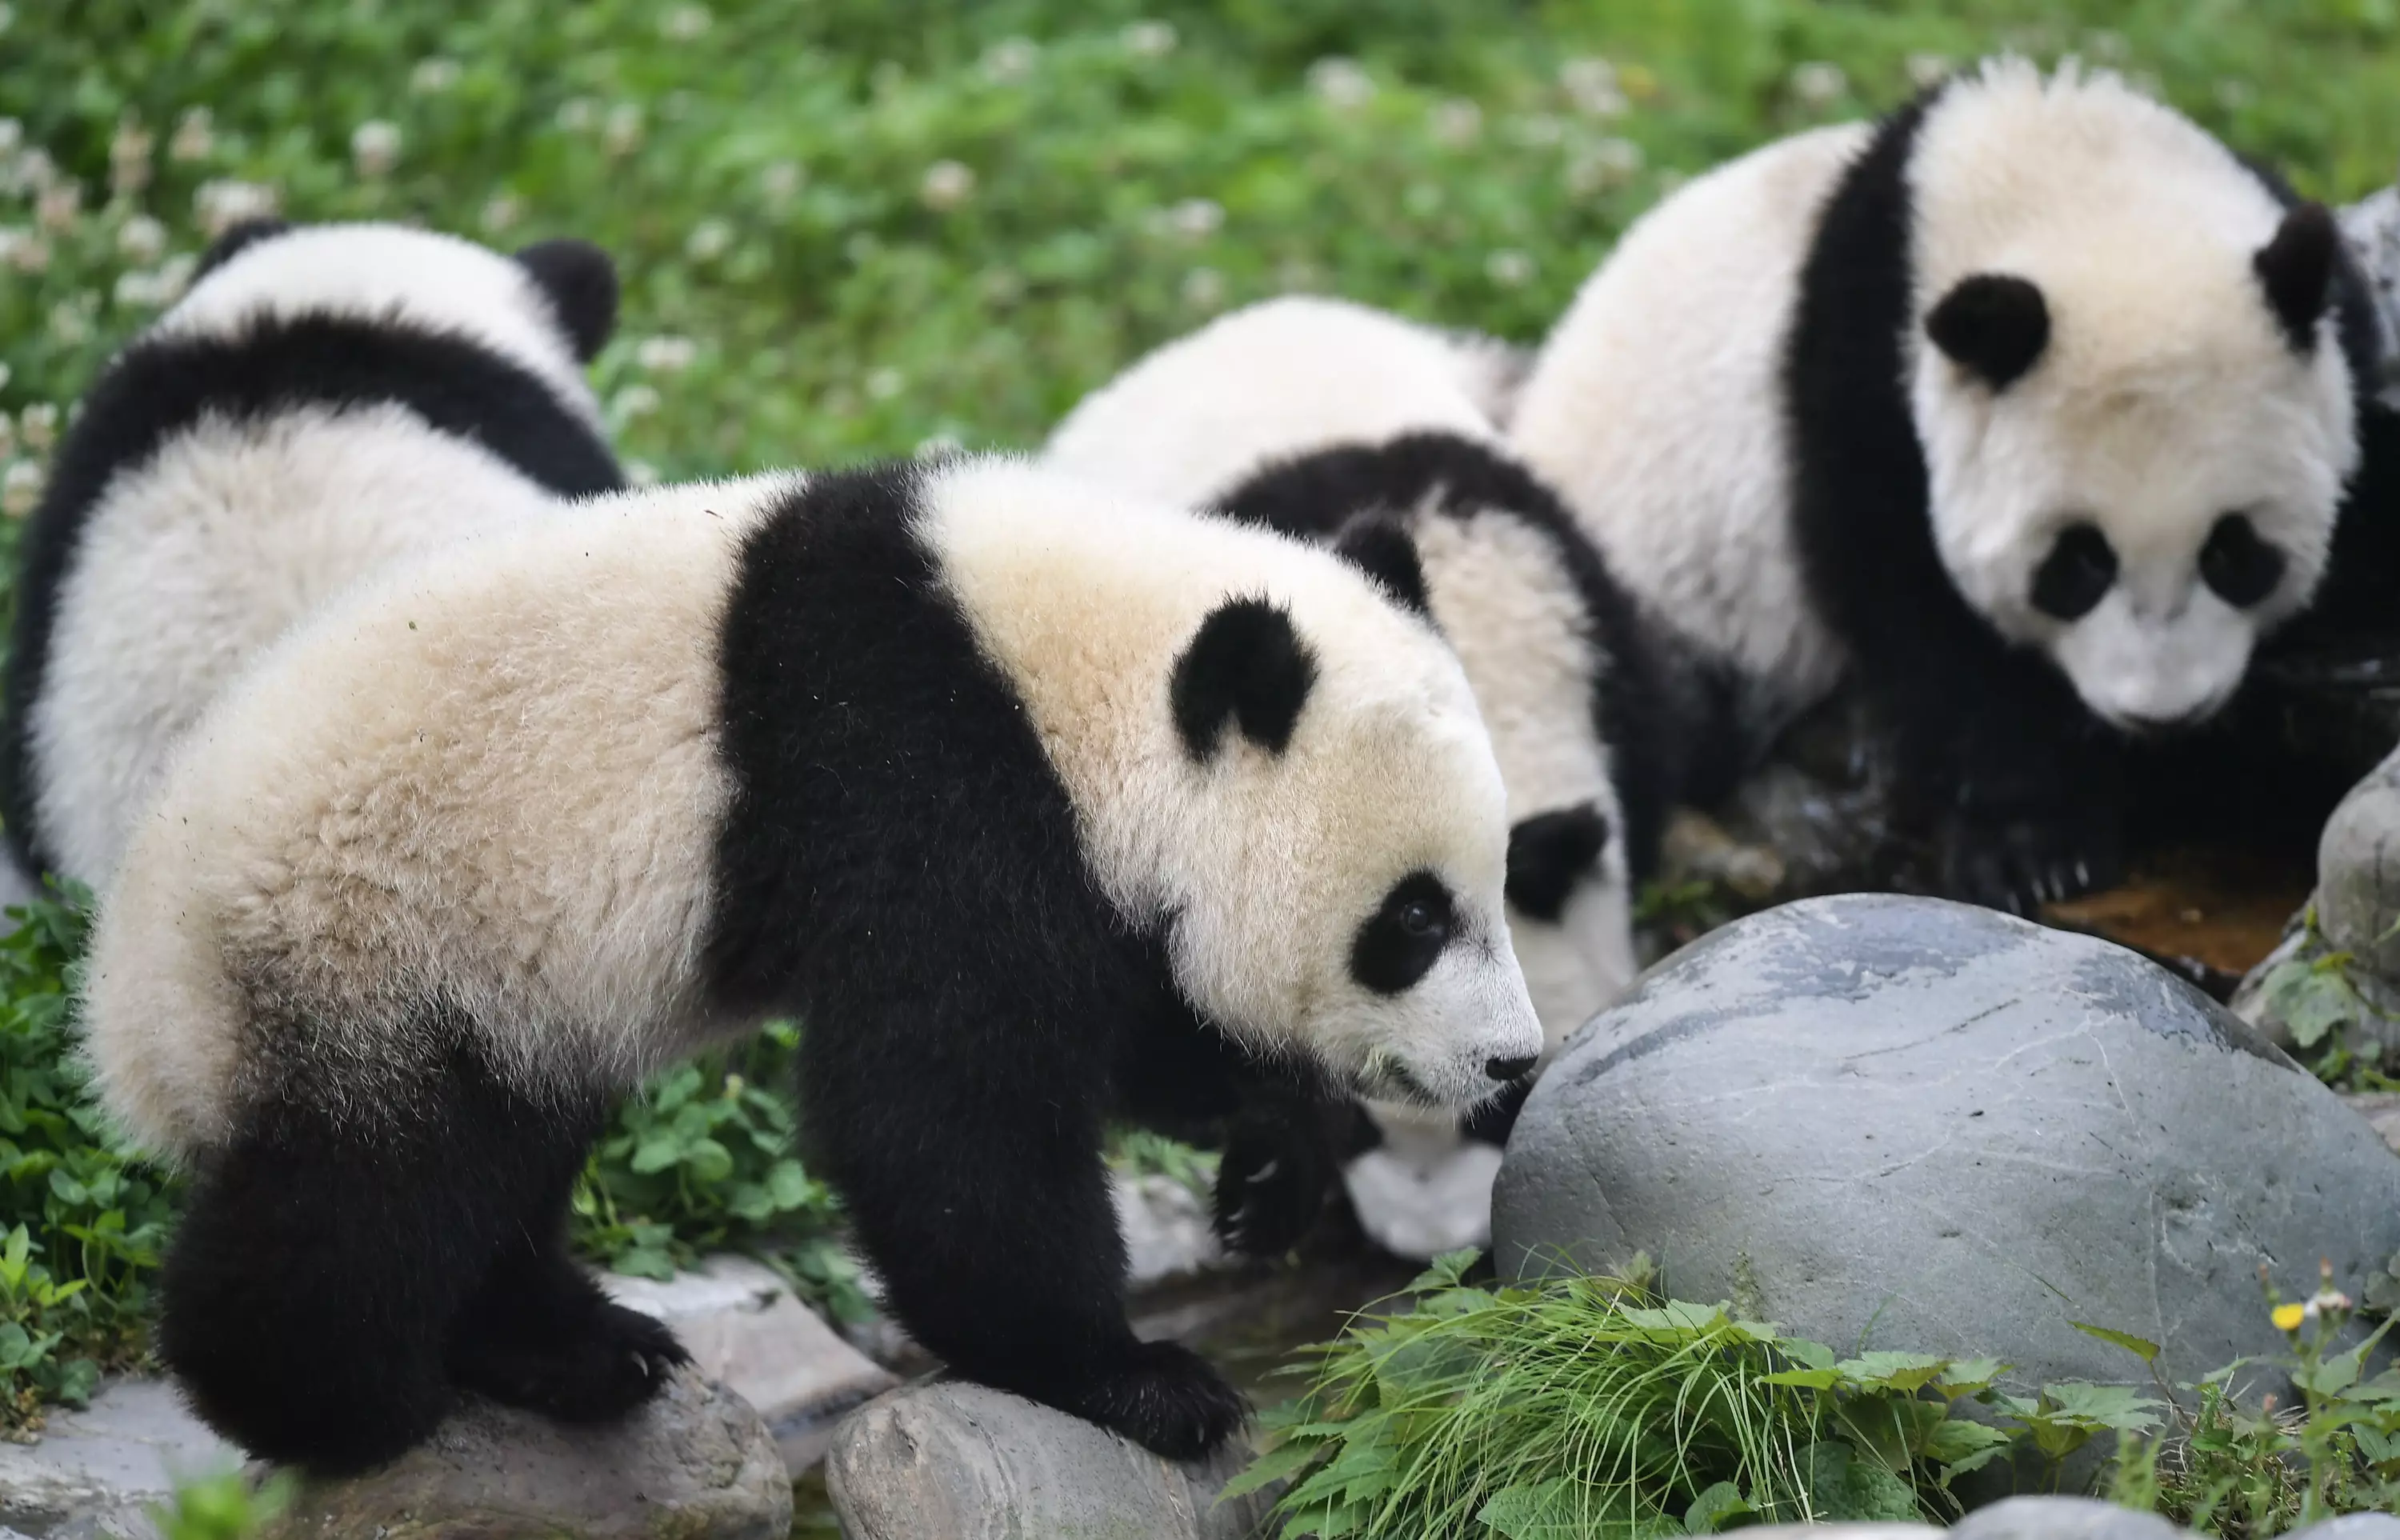 Some of the other pandas in Wolong Nature Reserve.